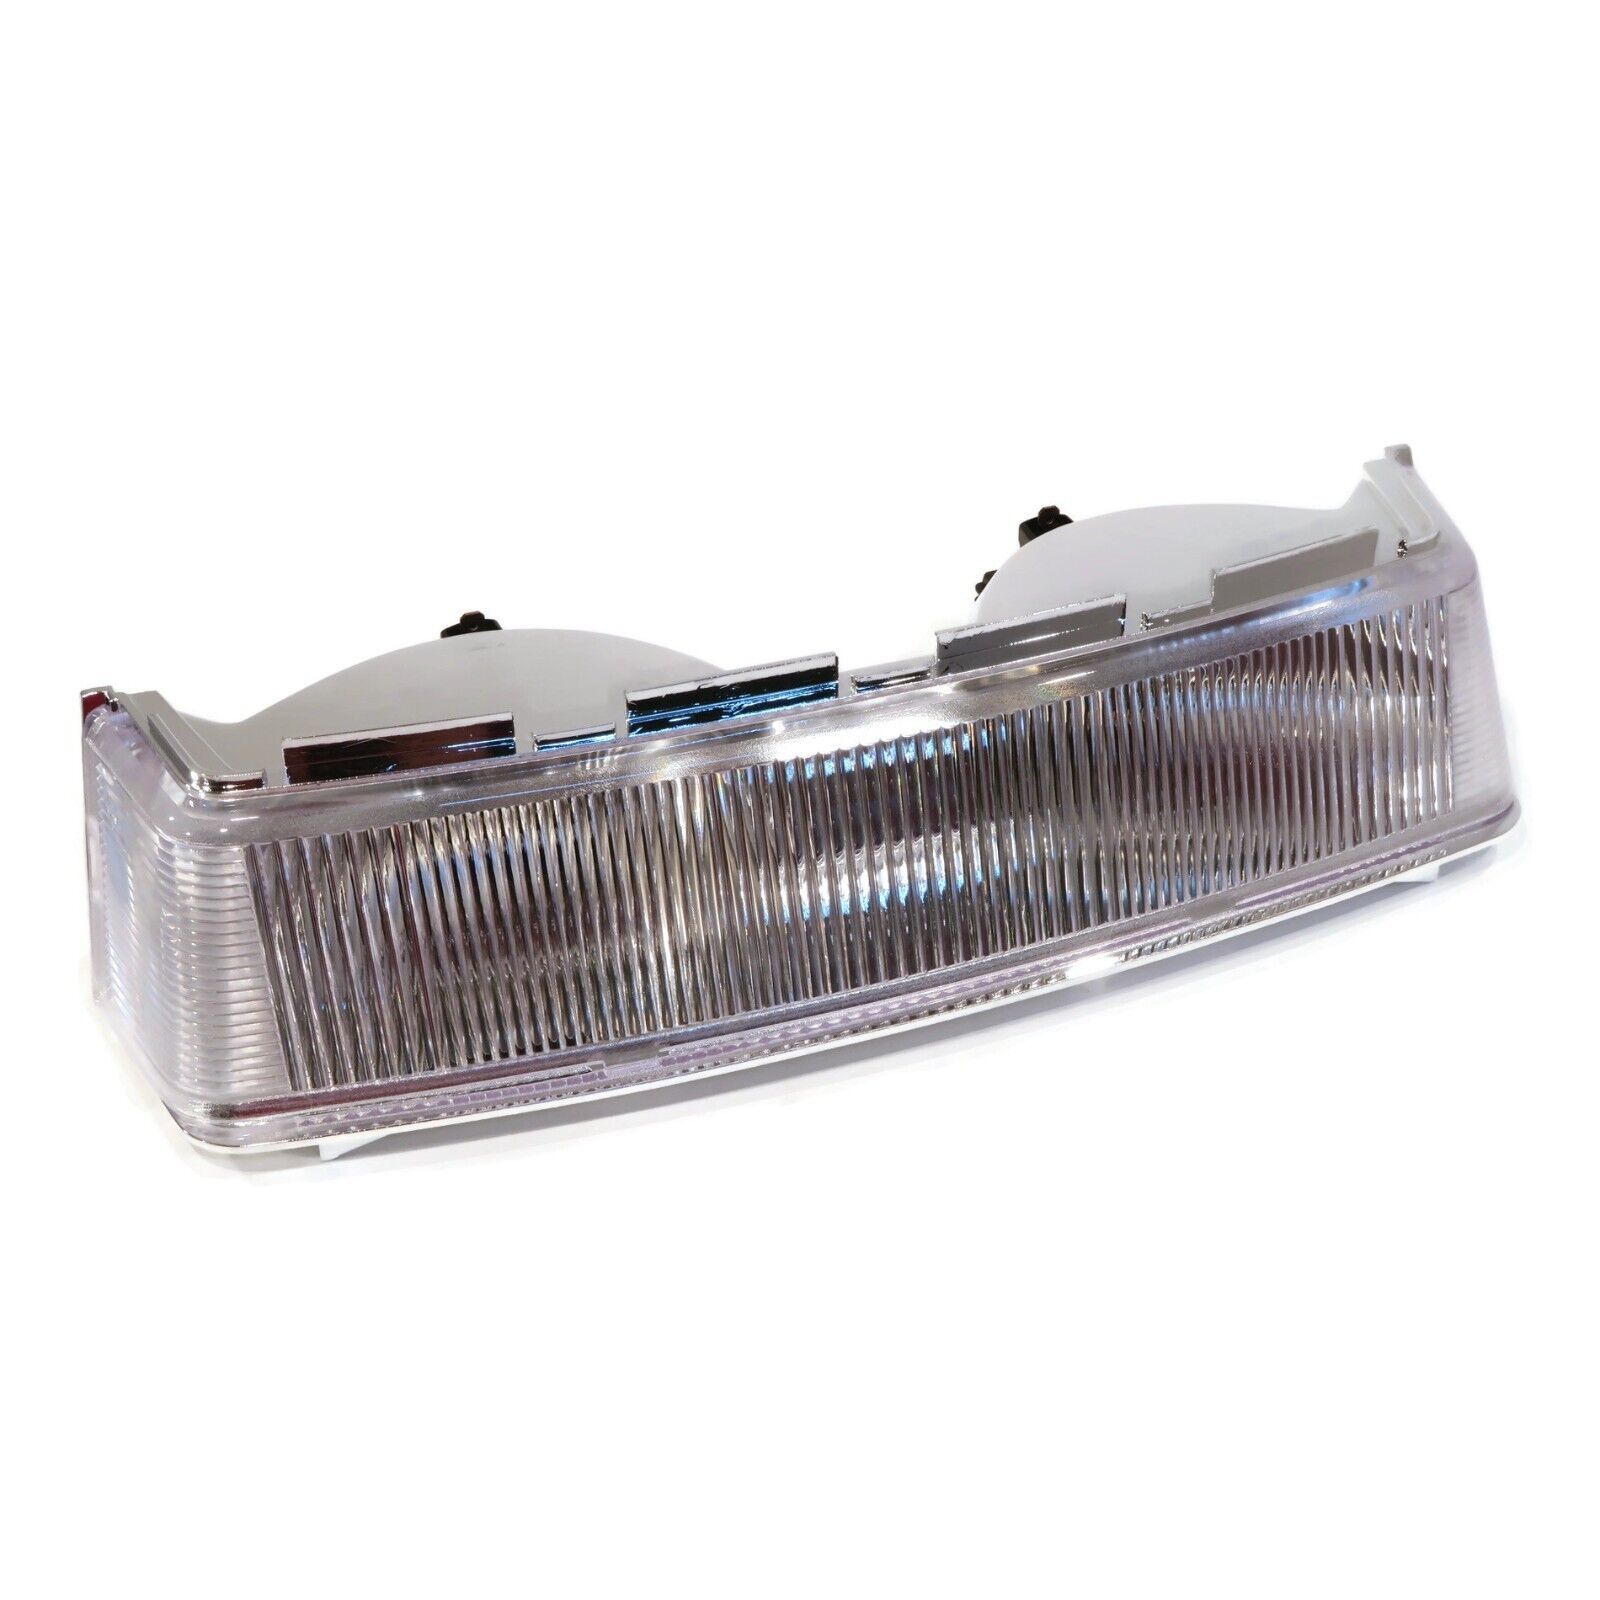 Simplicity HEADLIGHT ASSEMBLY for 1703945SM, 1703945